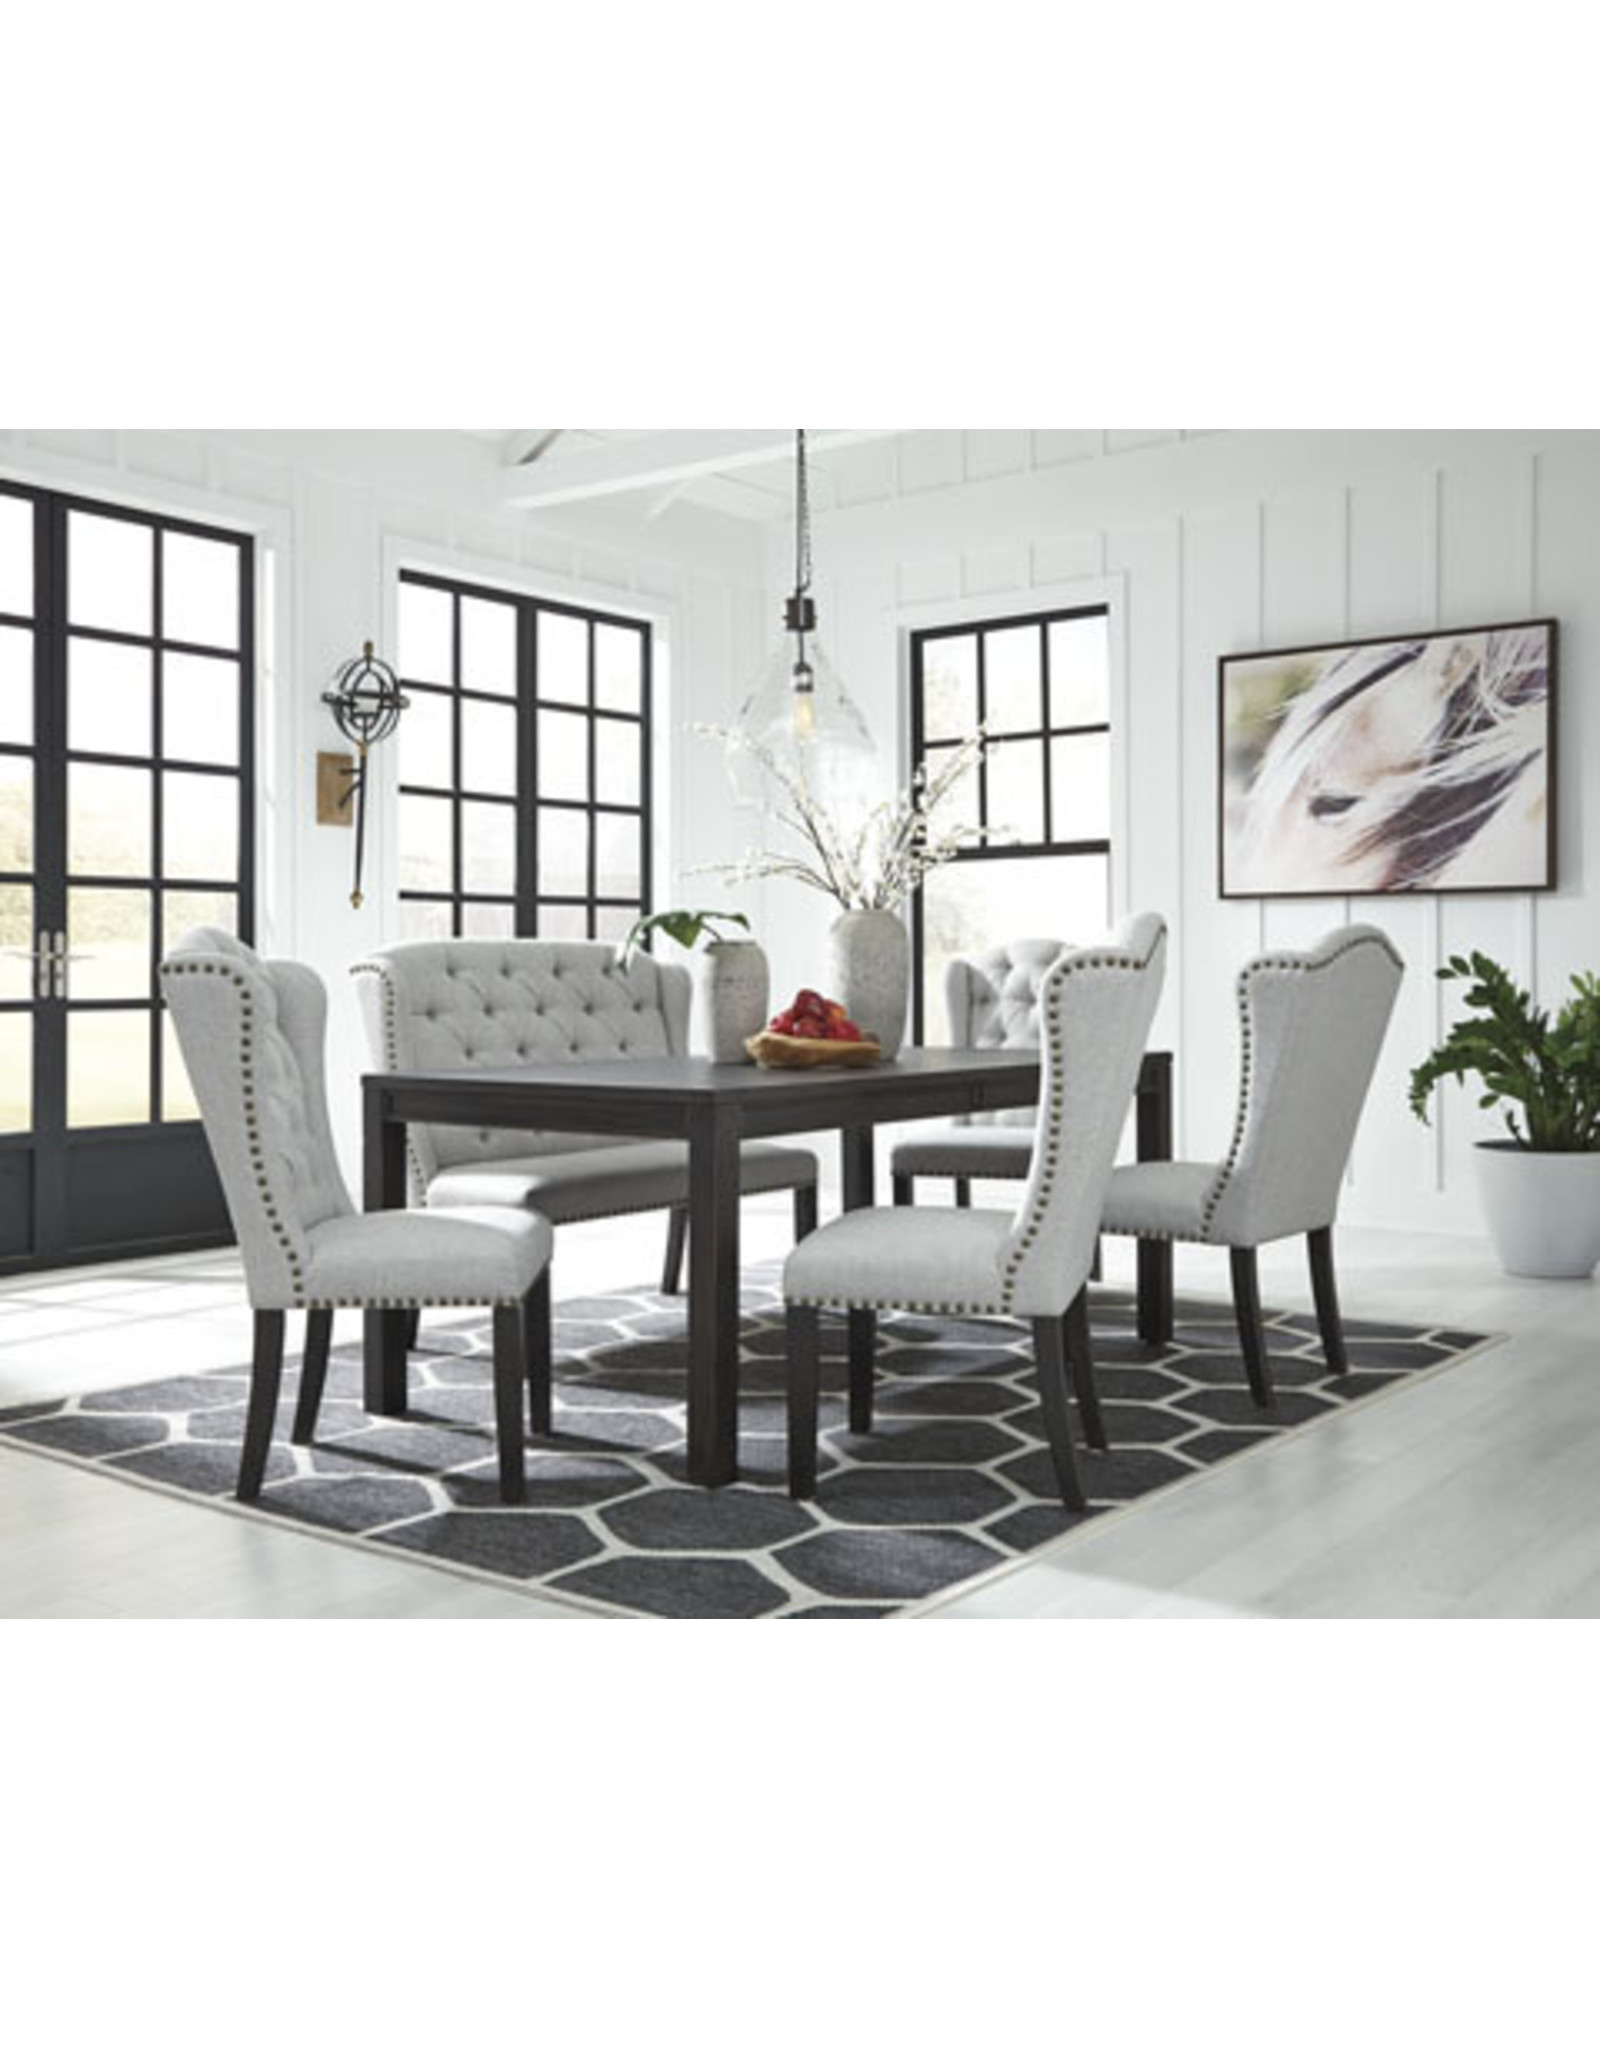 Jeanette D702 Table/4 Chairs & Bench